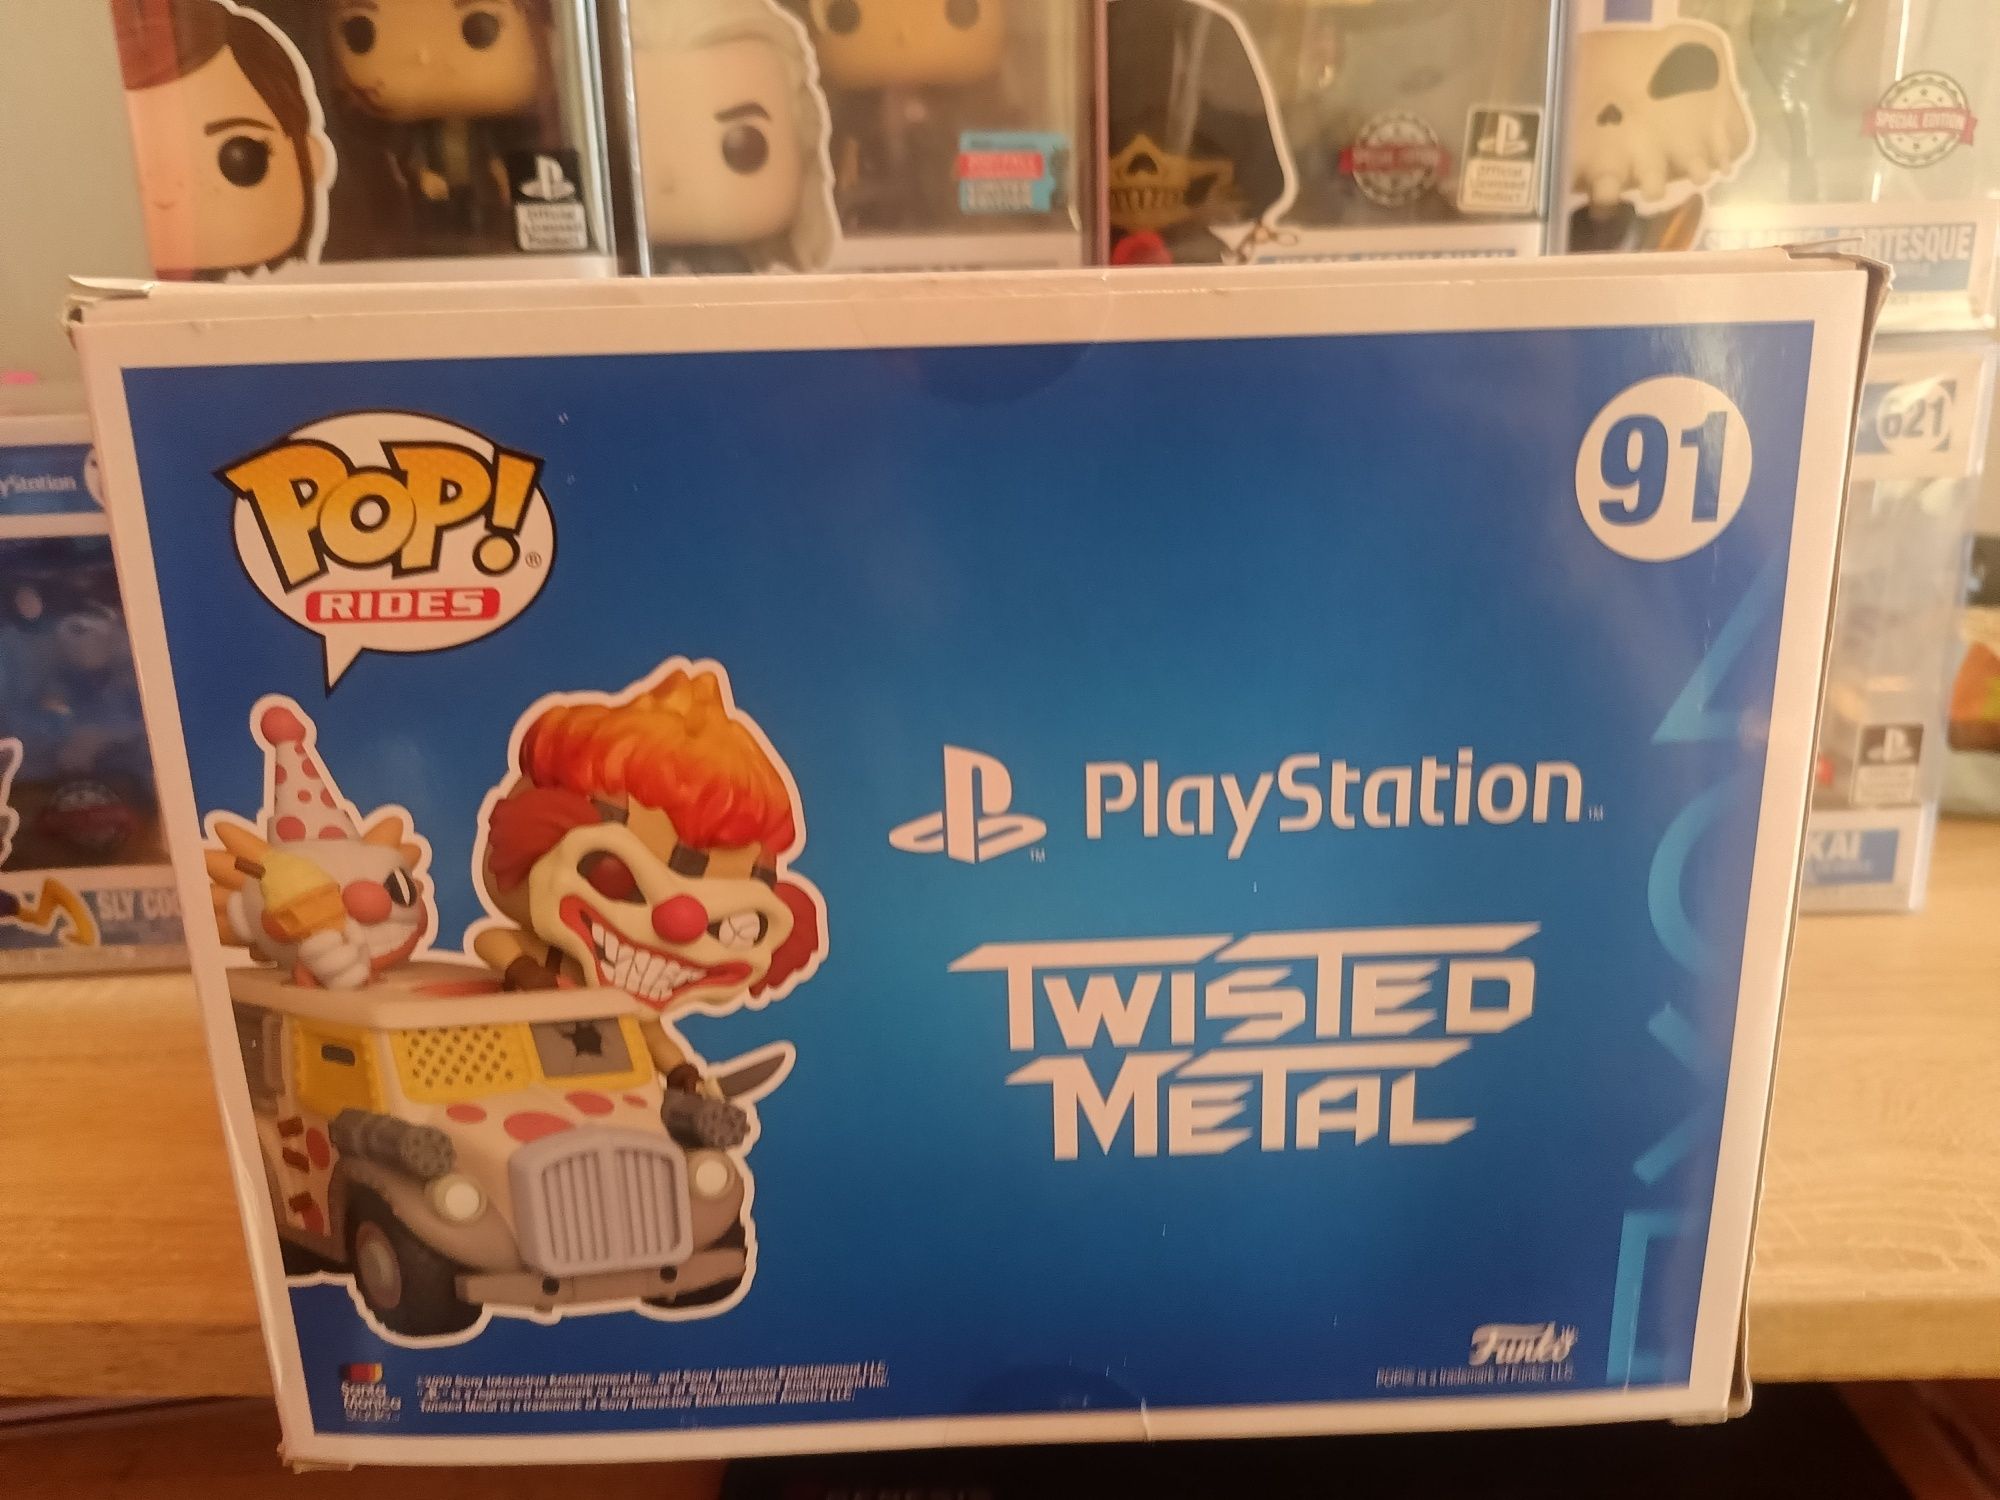 Funko pop sweet tooth PlayStation 91